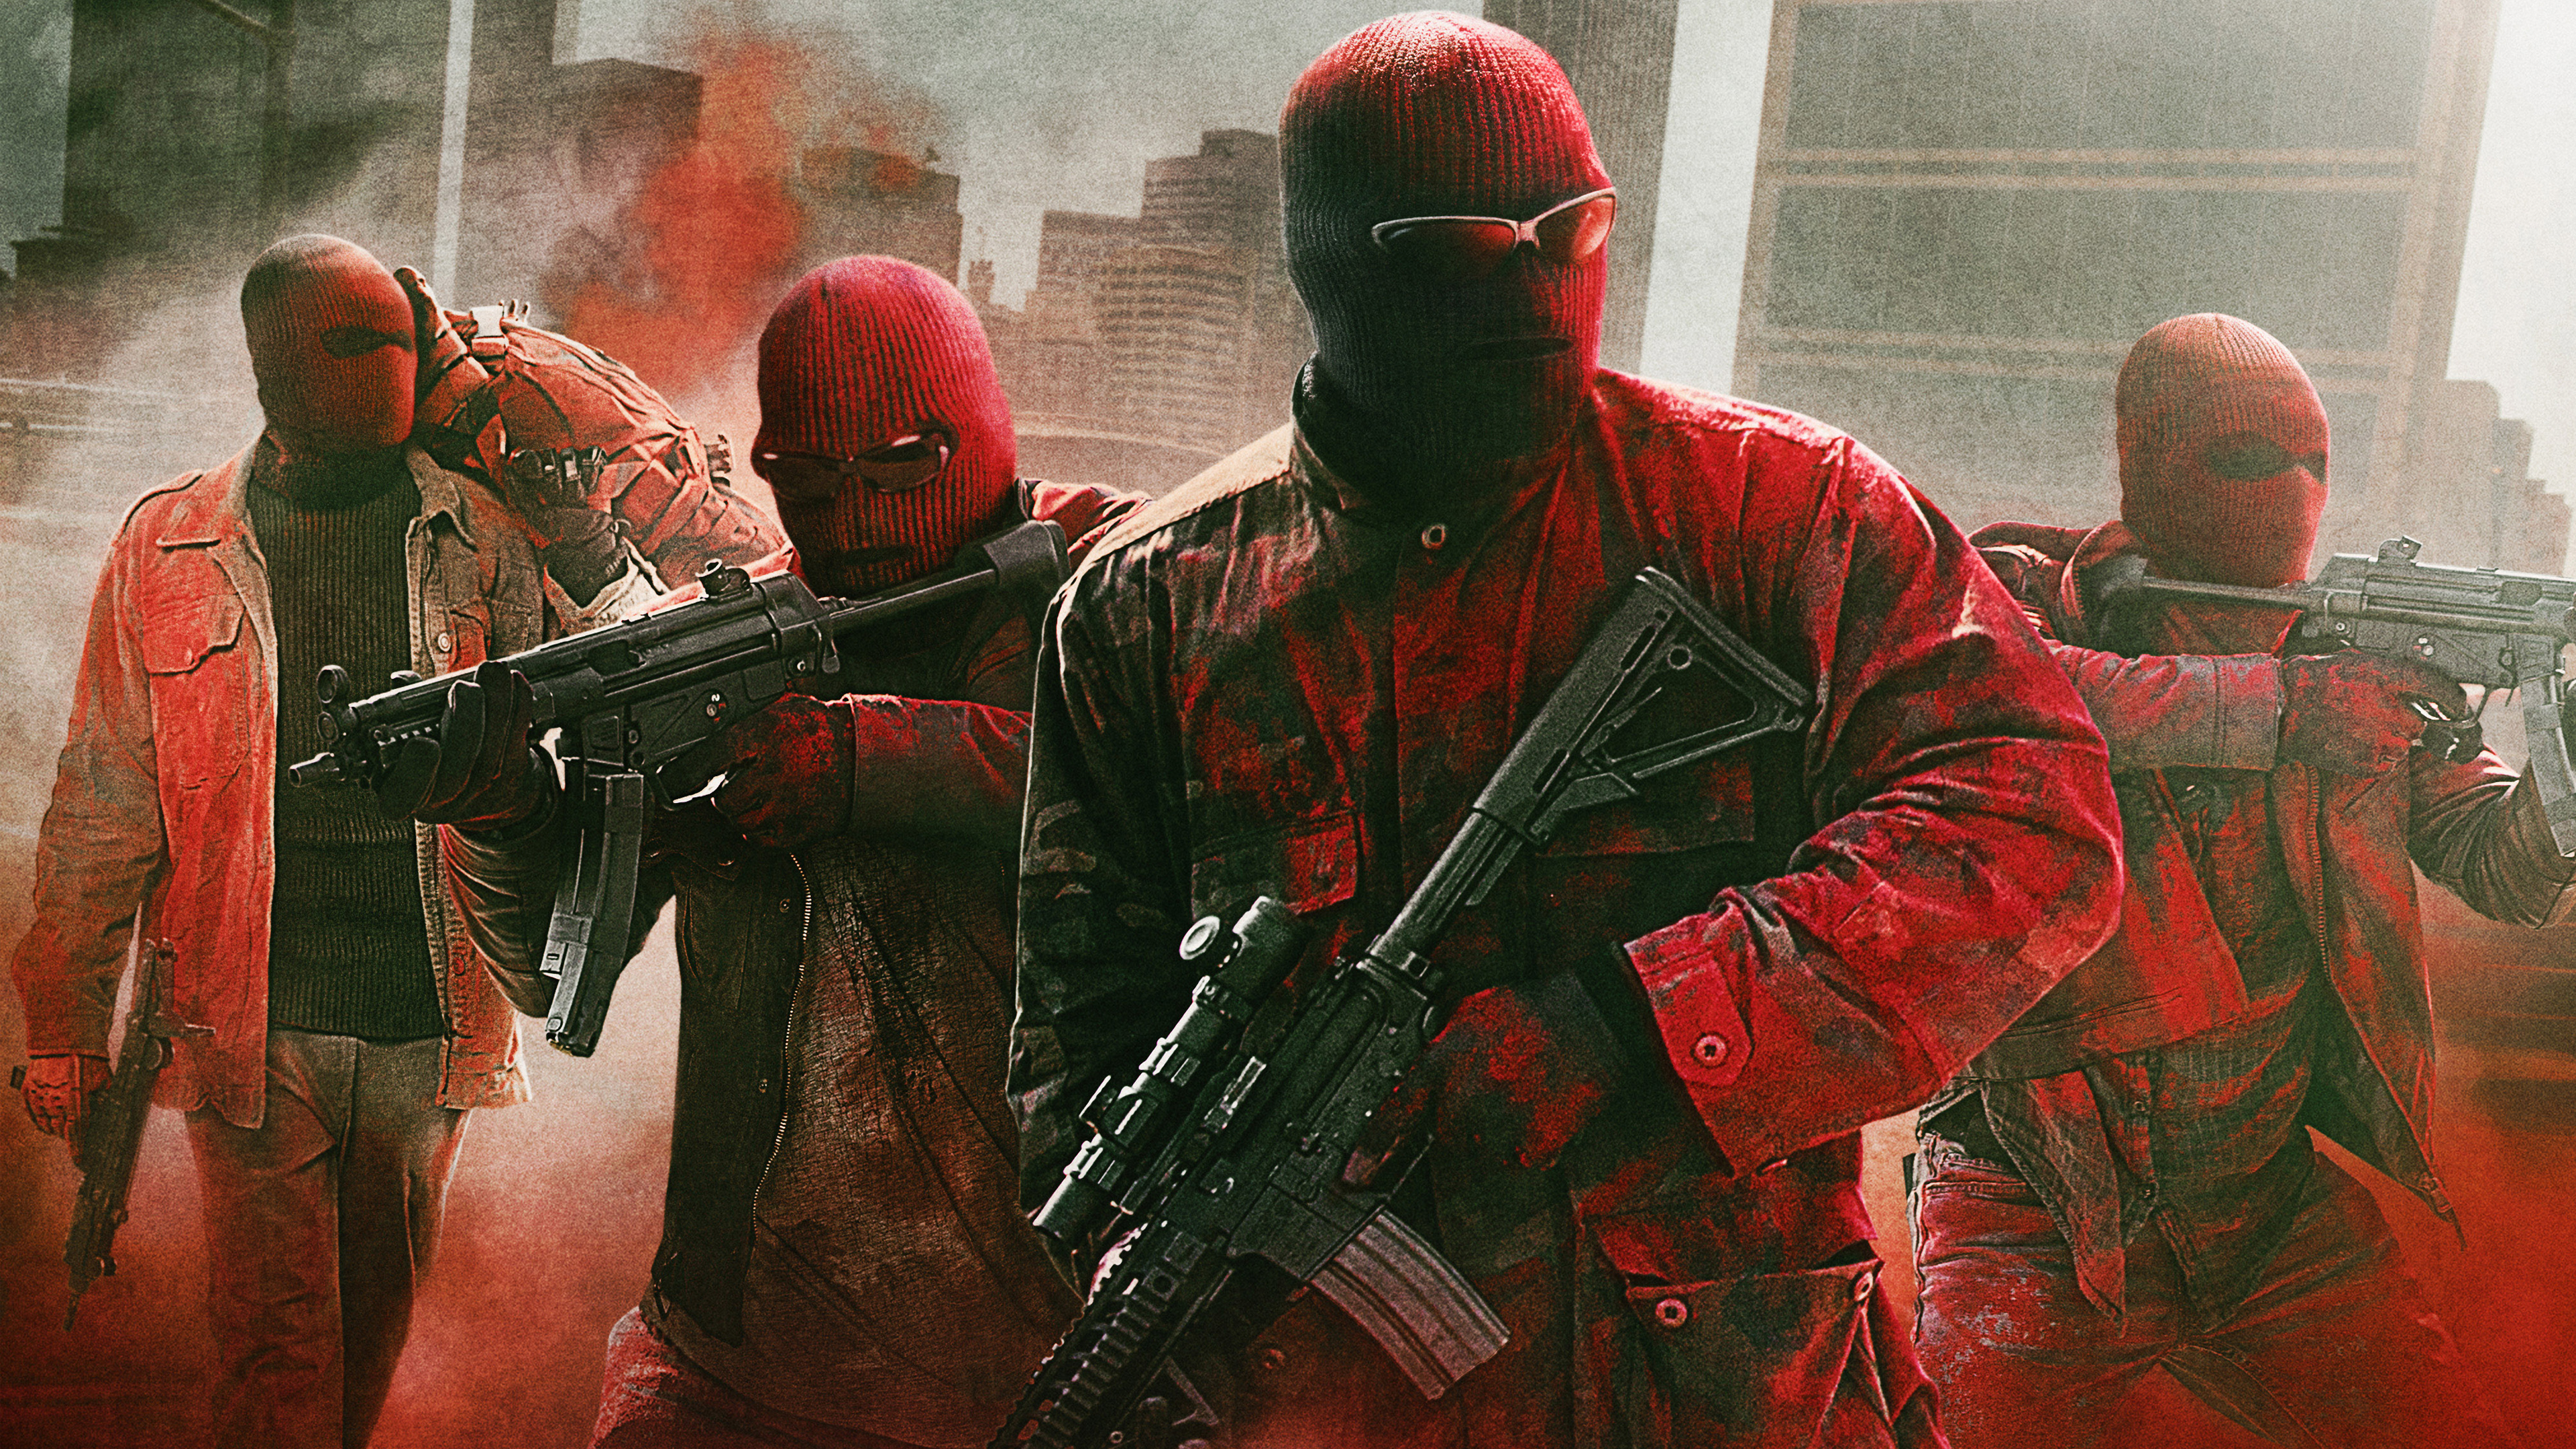 TRIPLE 9 Is A Simple, Pulpy Tough Guy Flick